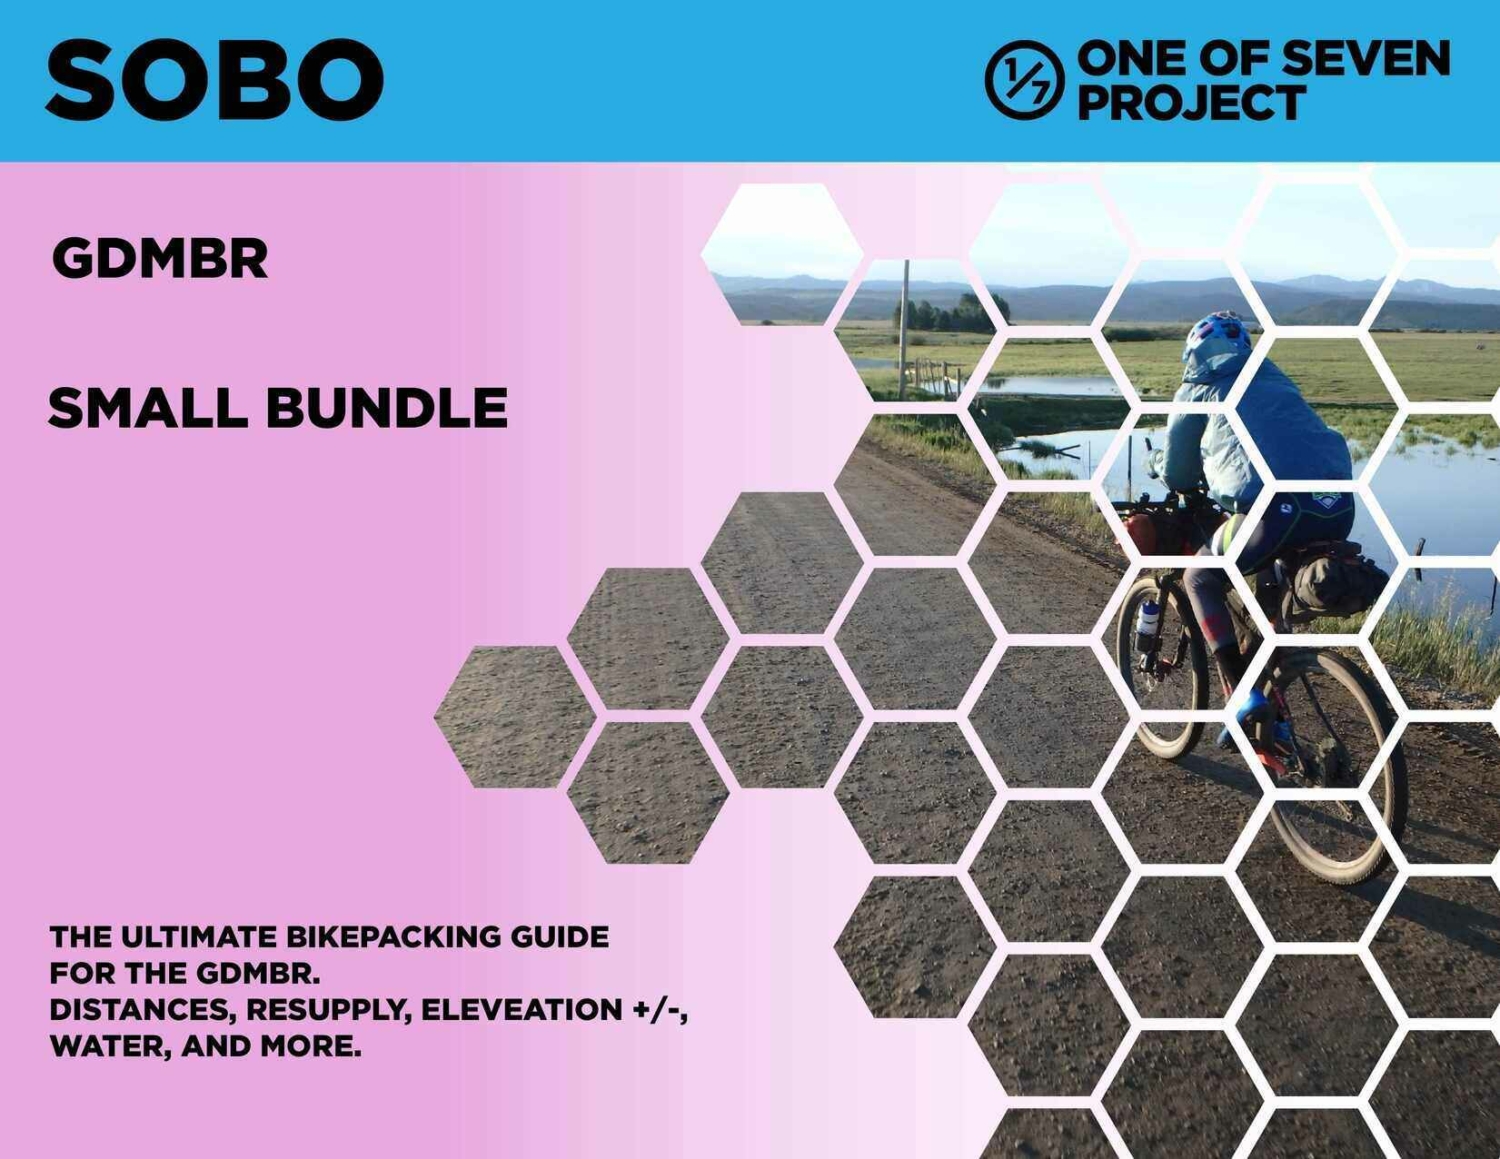 GDMBR SOBO Small Bundle, planning aid, guide, bikepacking